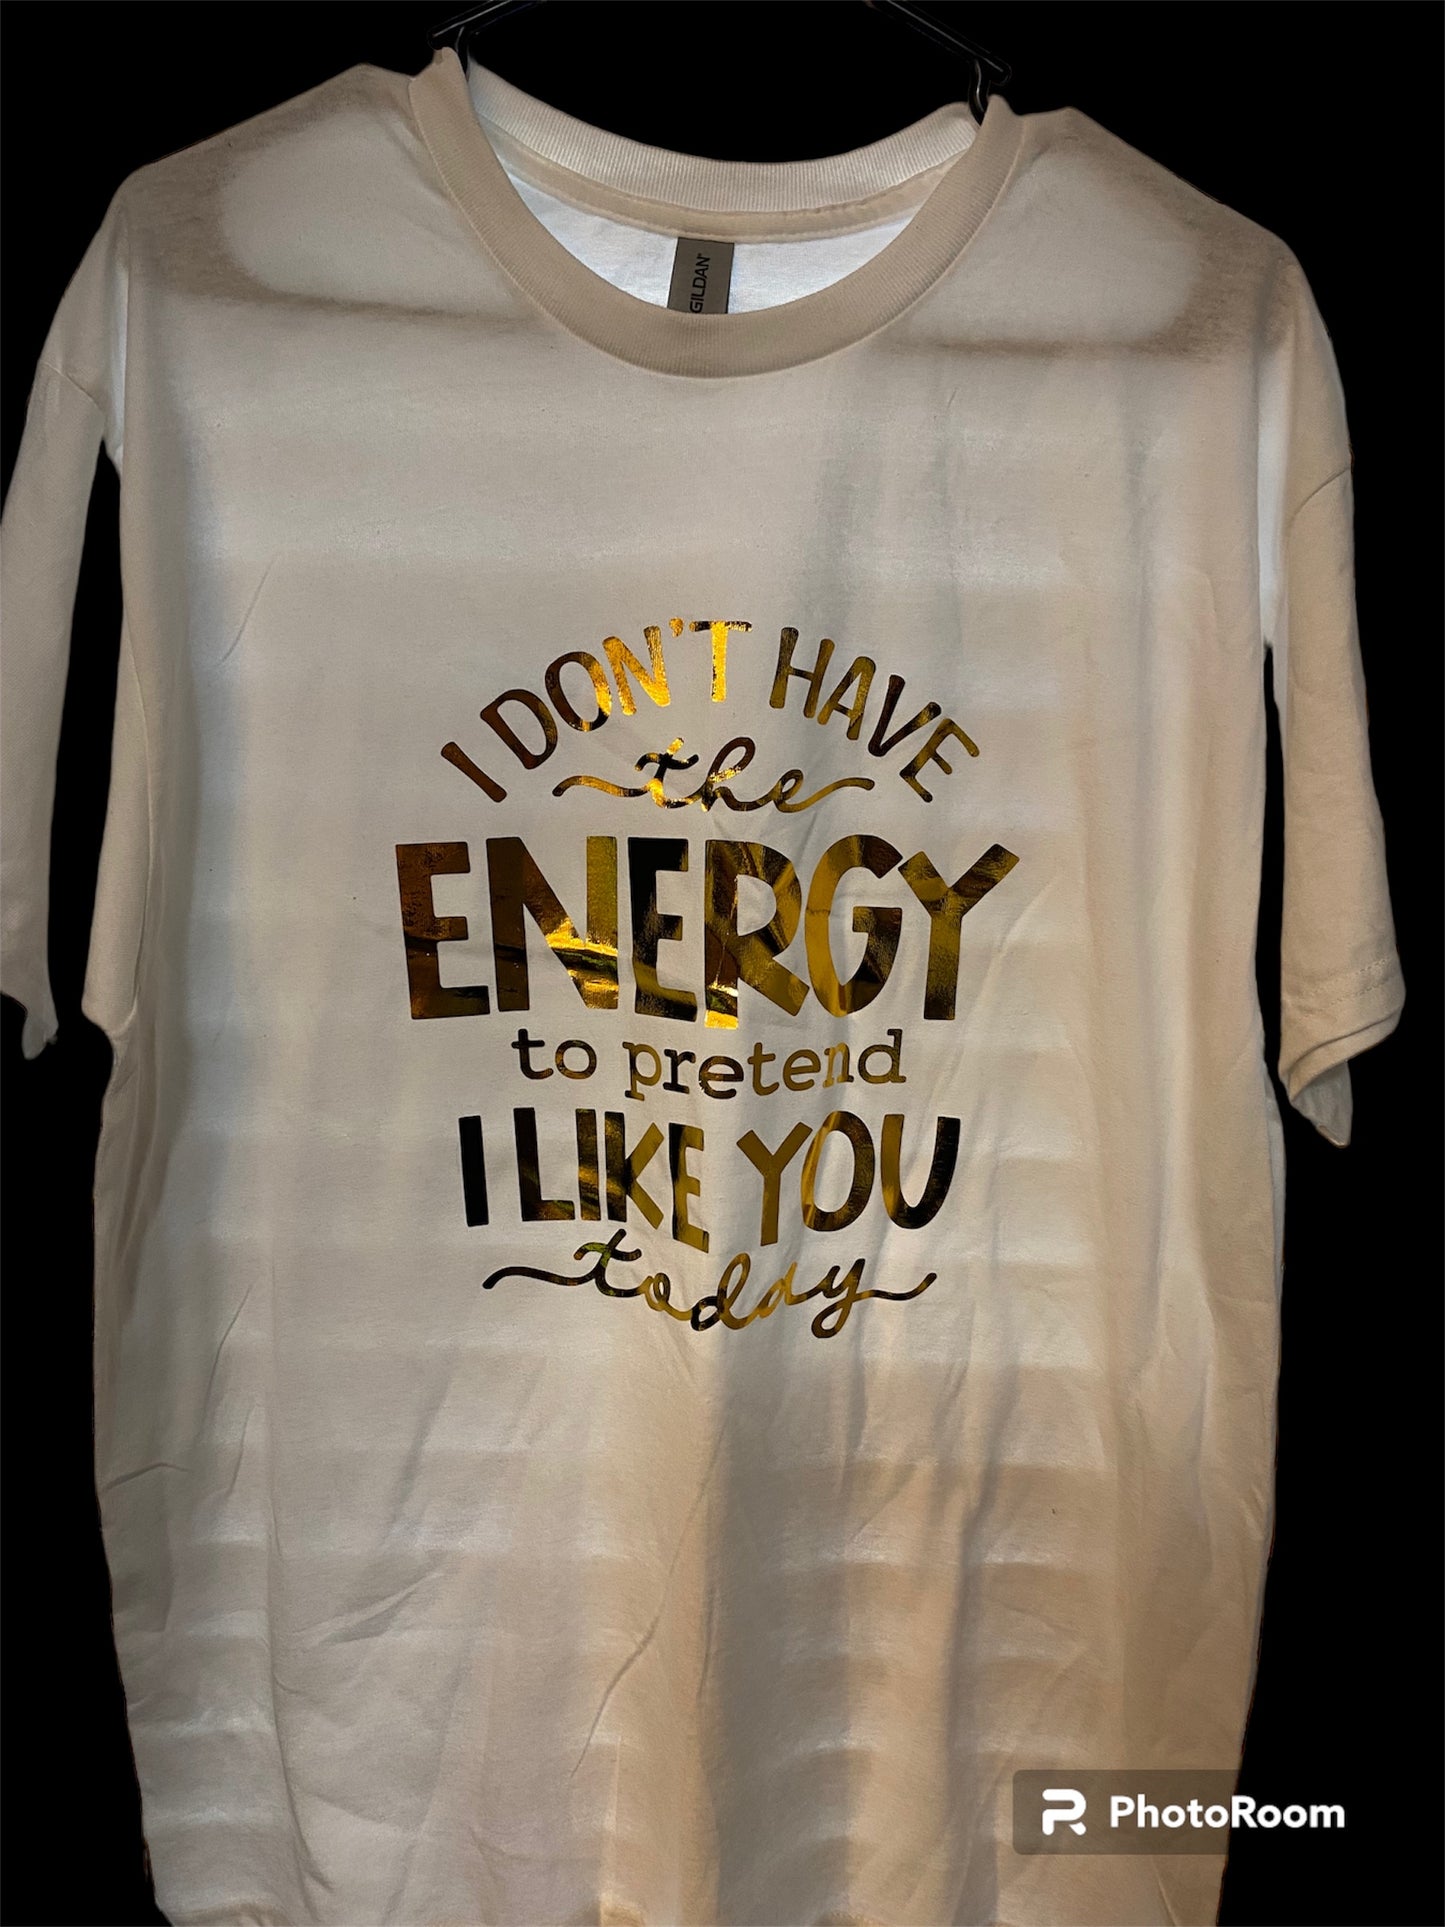 T Shirt- I don’t have the energy to pretend I like you today